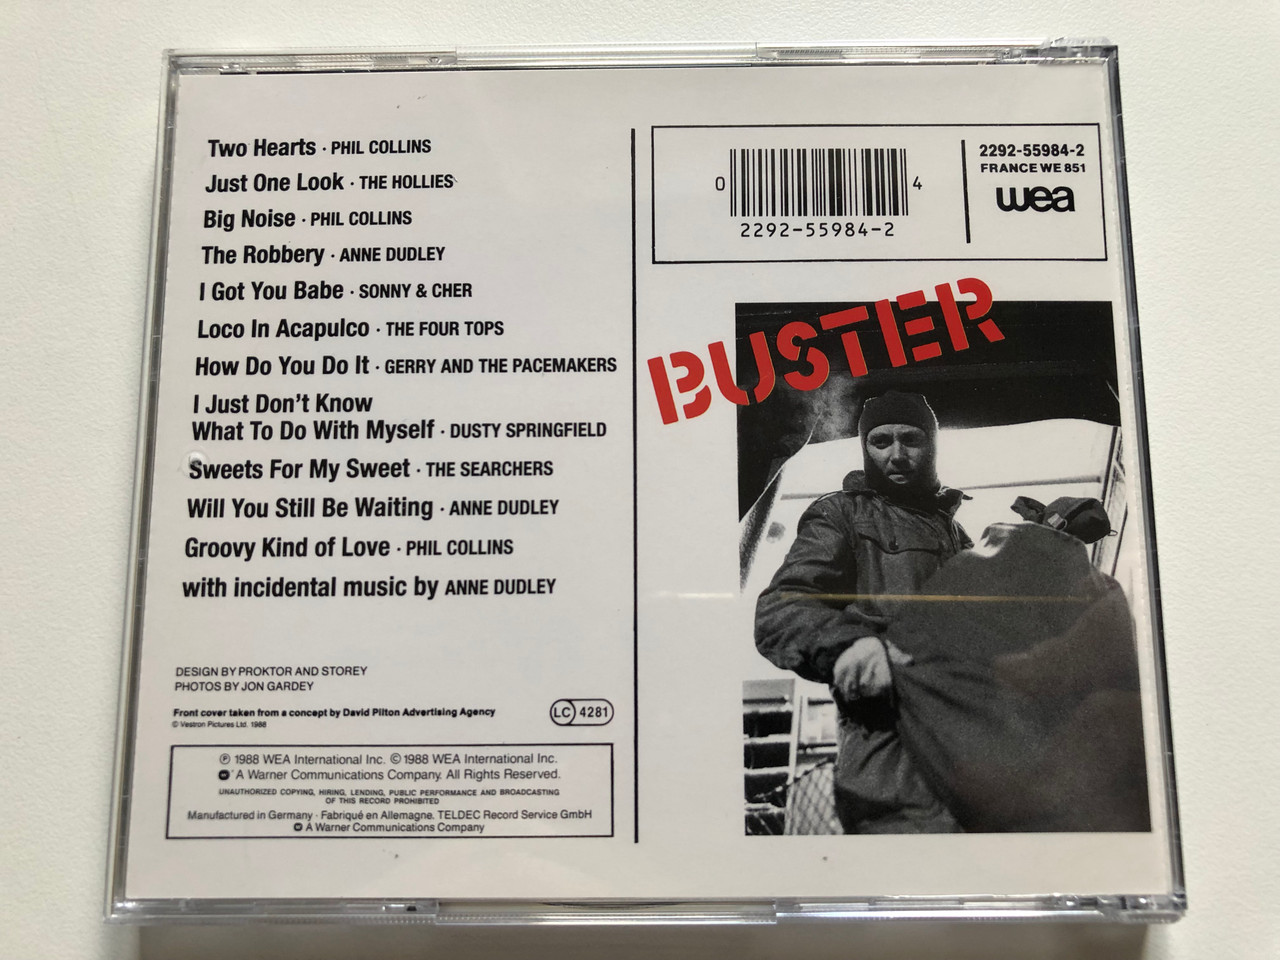 https://cdn10.bigcommerce.com/s-62bdpkt7pb/products/0/images/242237/Buster_The_Original_Motion_Picture_Soundtrack_Featuring_new_tracks_by_Phil_Collins_The_Four_Tops_and_classic_tracks_by_The_Hollies_The_Searchers_Gerry_And_The_Pacemakers_Dusty_Spri_7__49773.1658741680.1280.1280.JPG?c=2&_gl=1*1svvb6m*_ga*MjA2NTIxMjE2MC4xNTkwNTEyNTMy*_ga_WS2VZYPC6G*MTY1ODczMDA4My40OTYuMS4xNjU4NzQxMzkxLjEy